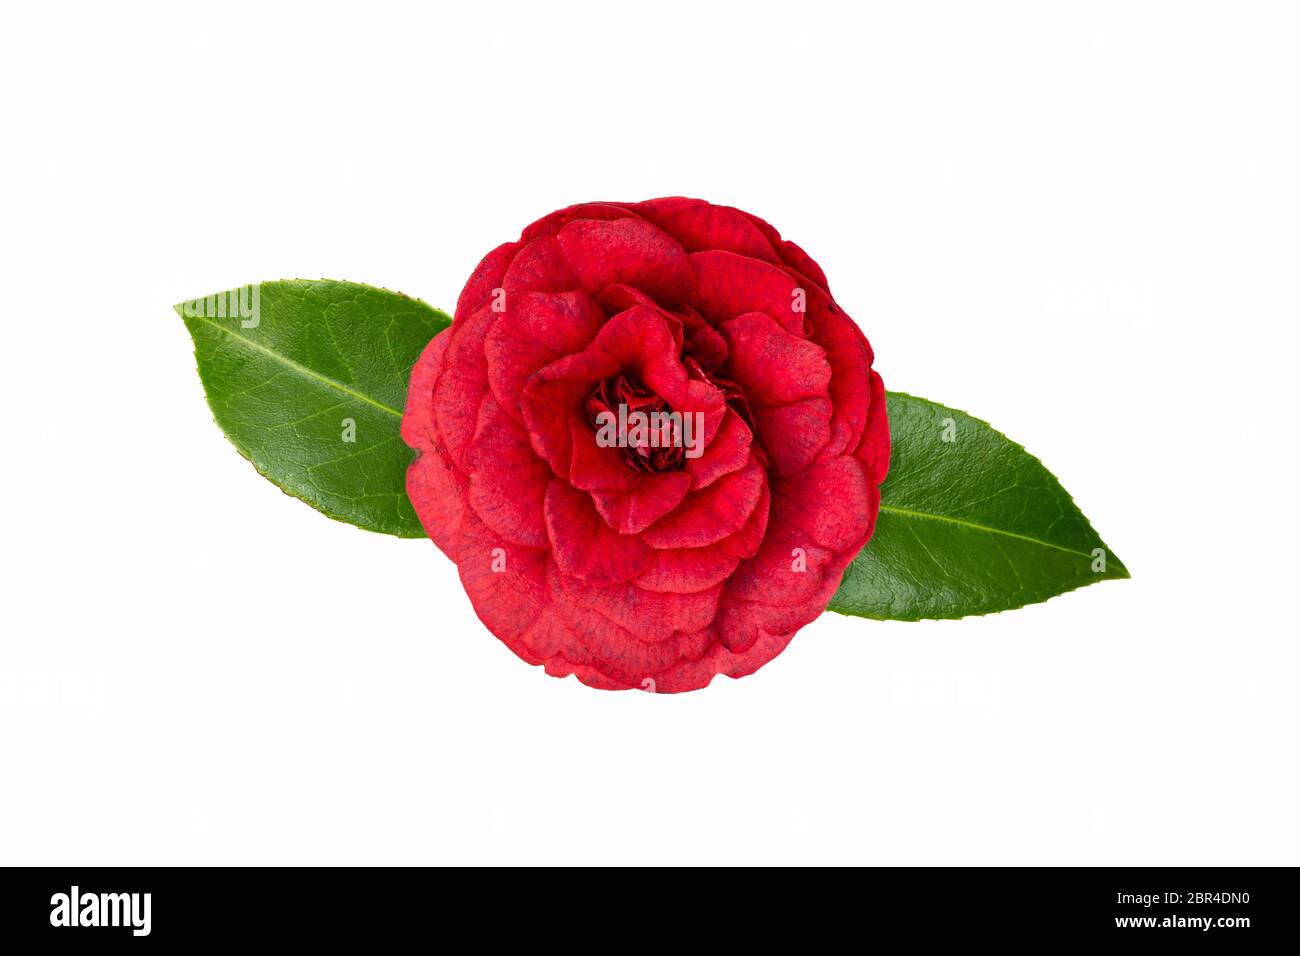 Red camellia flower isolated on white background. Winter rose Stock Photo